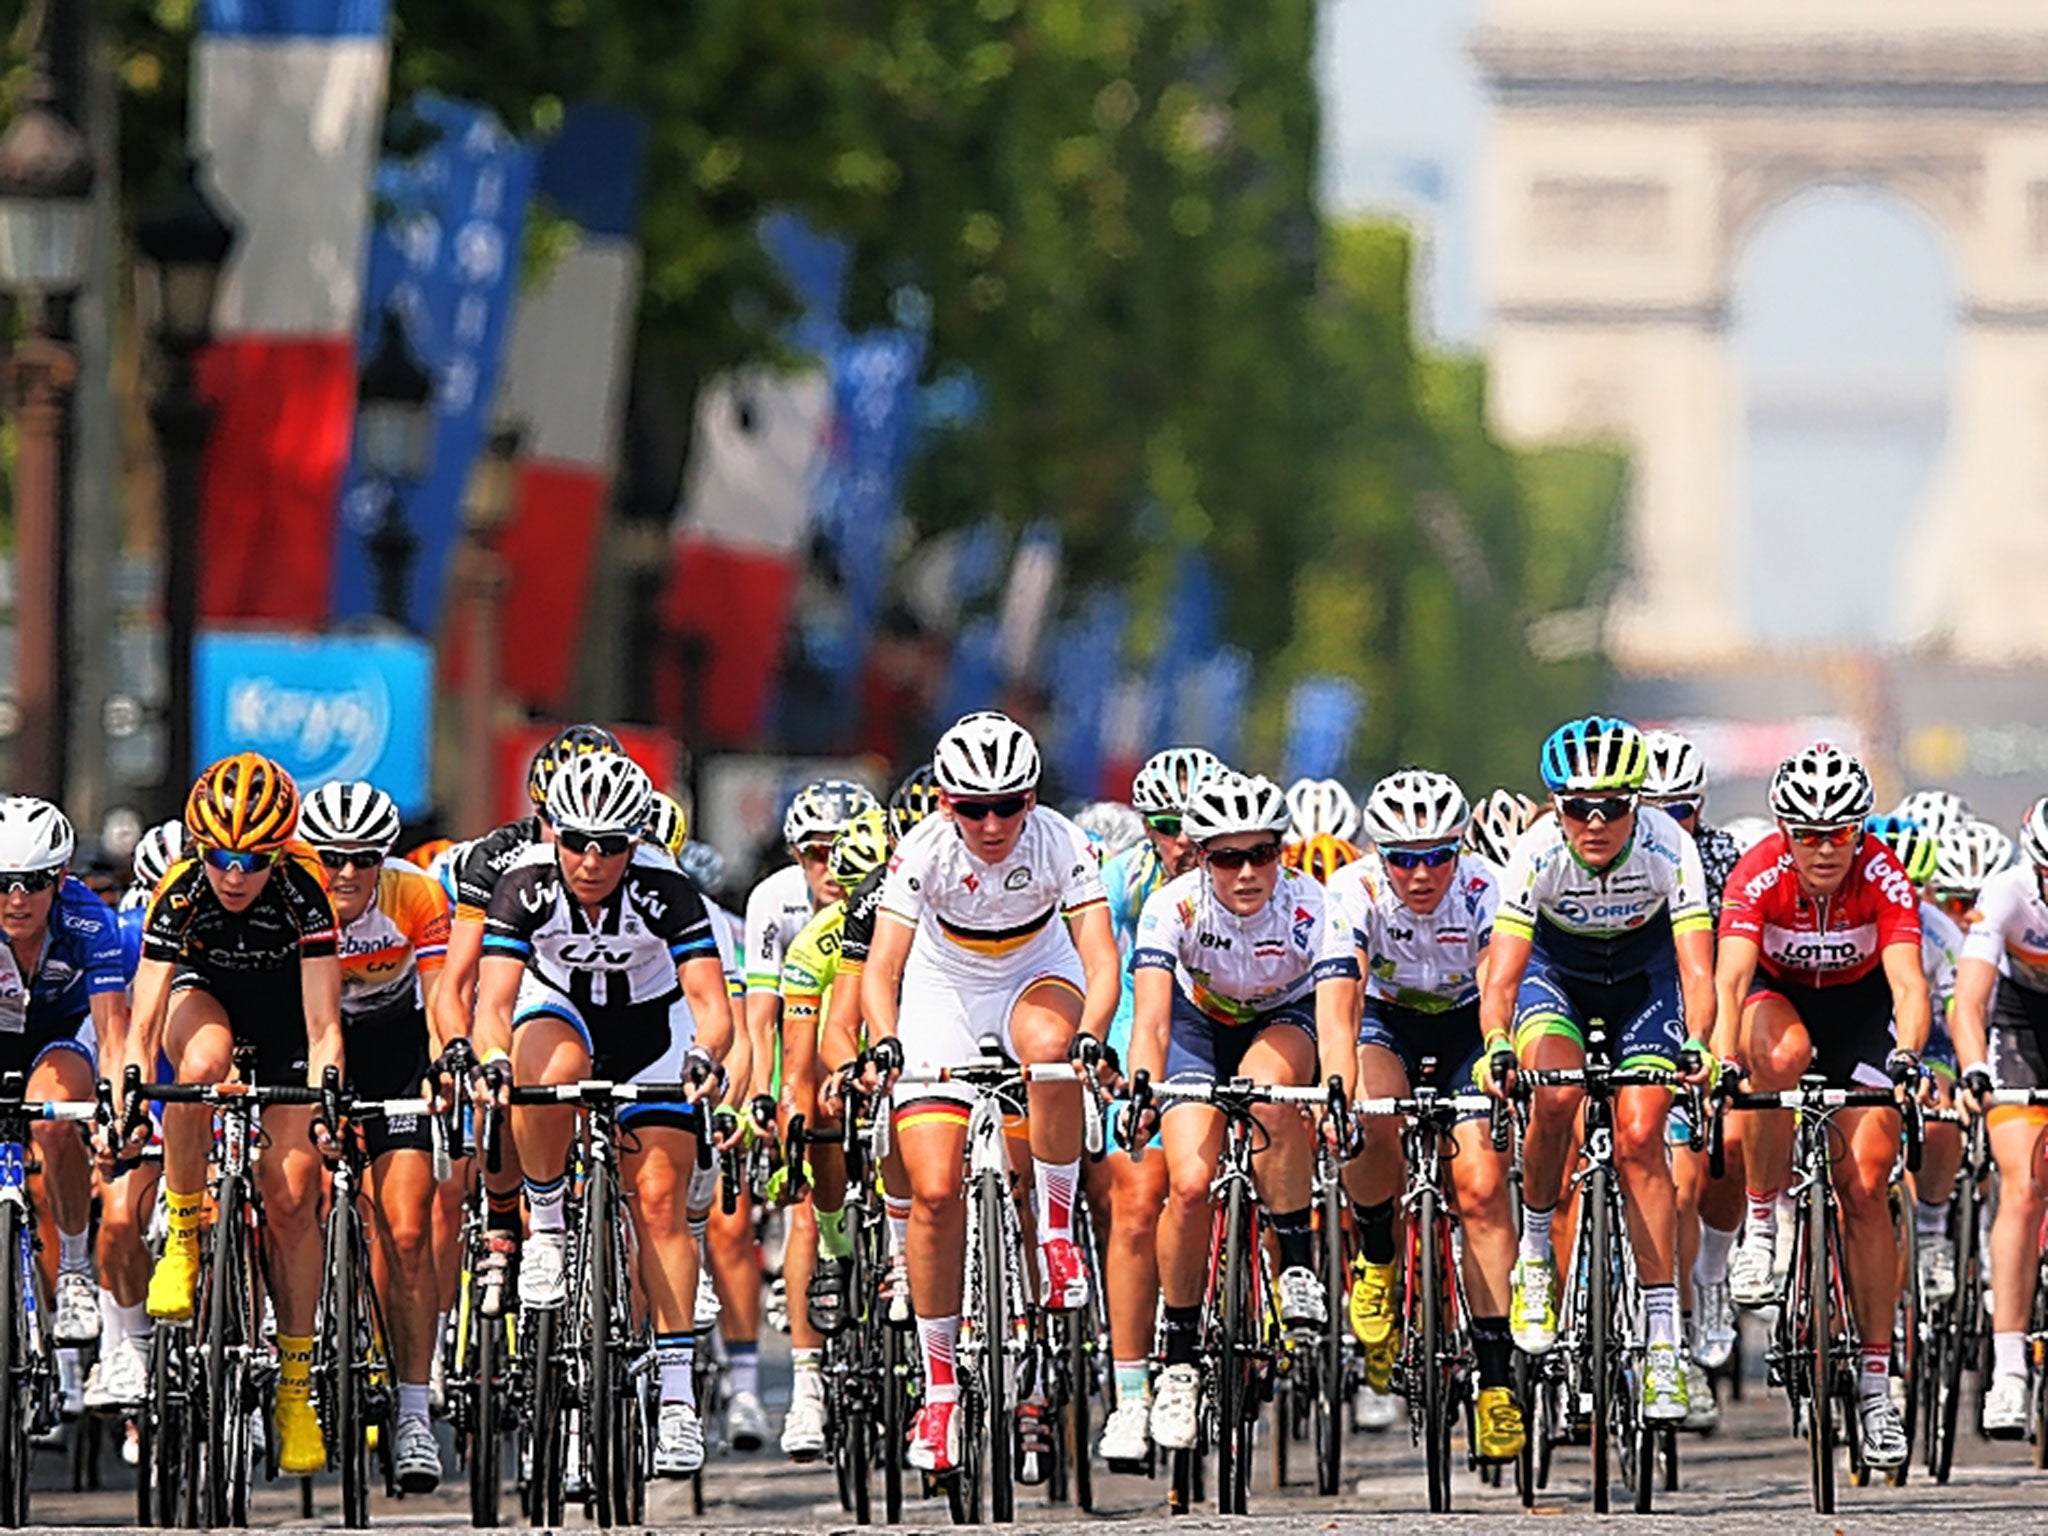 The inaugural La Course event starts on the Champs Elysées last year